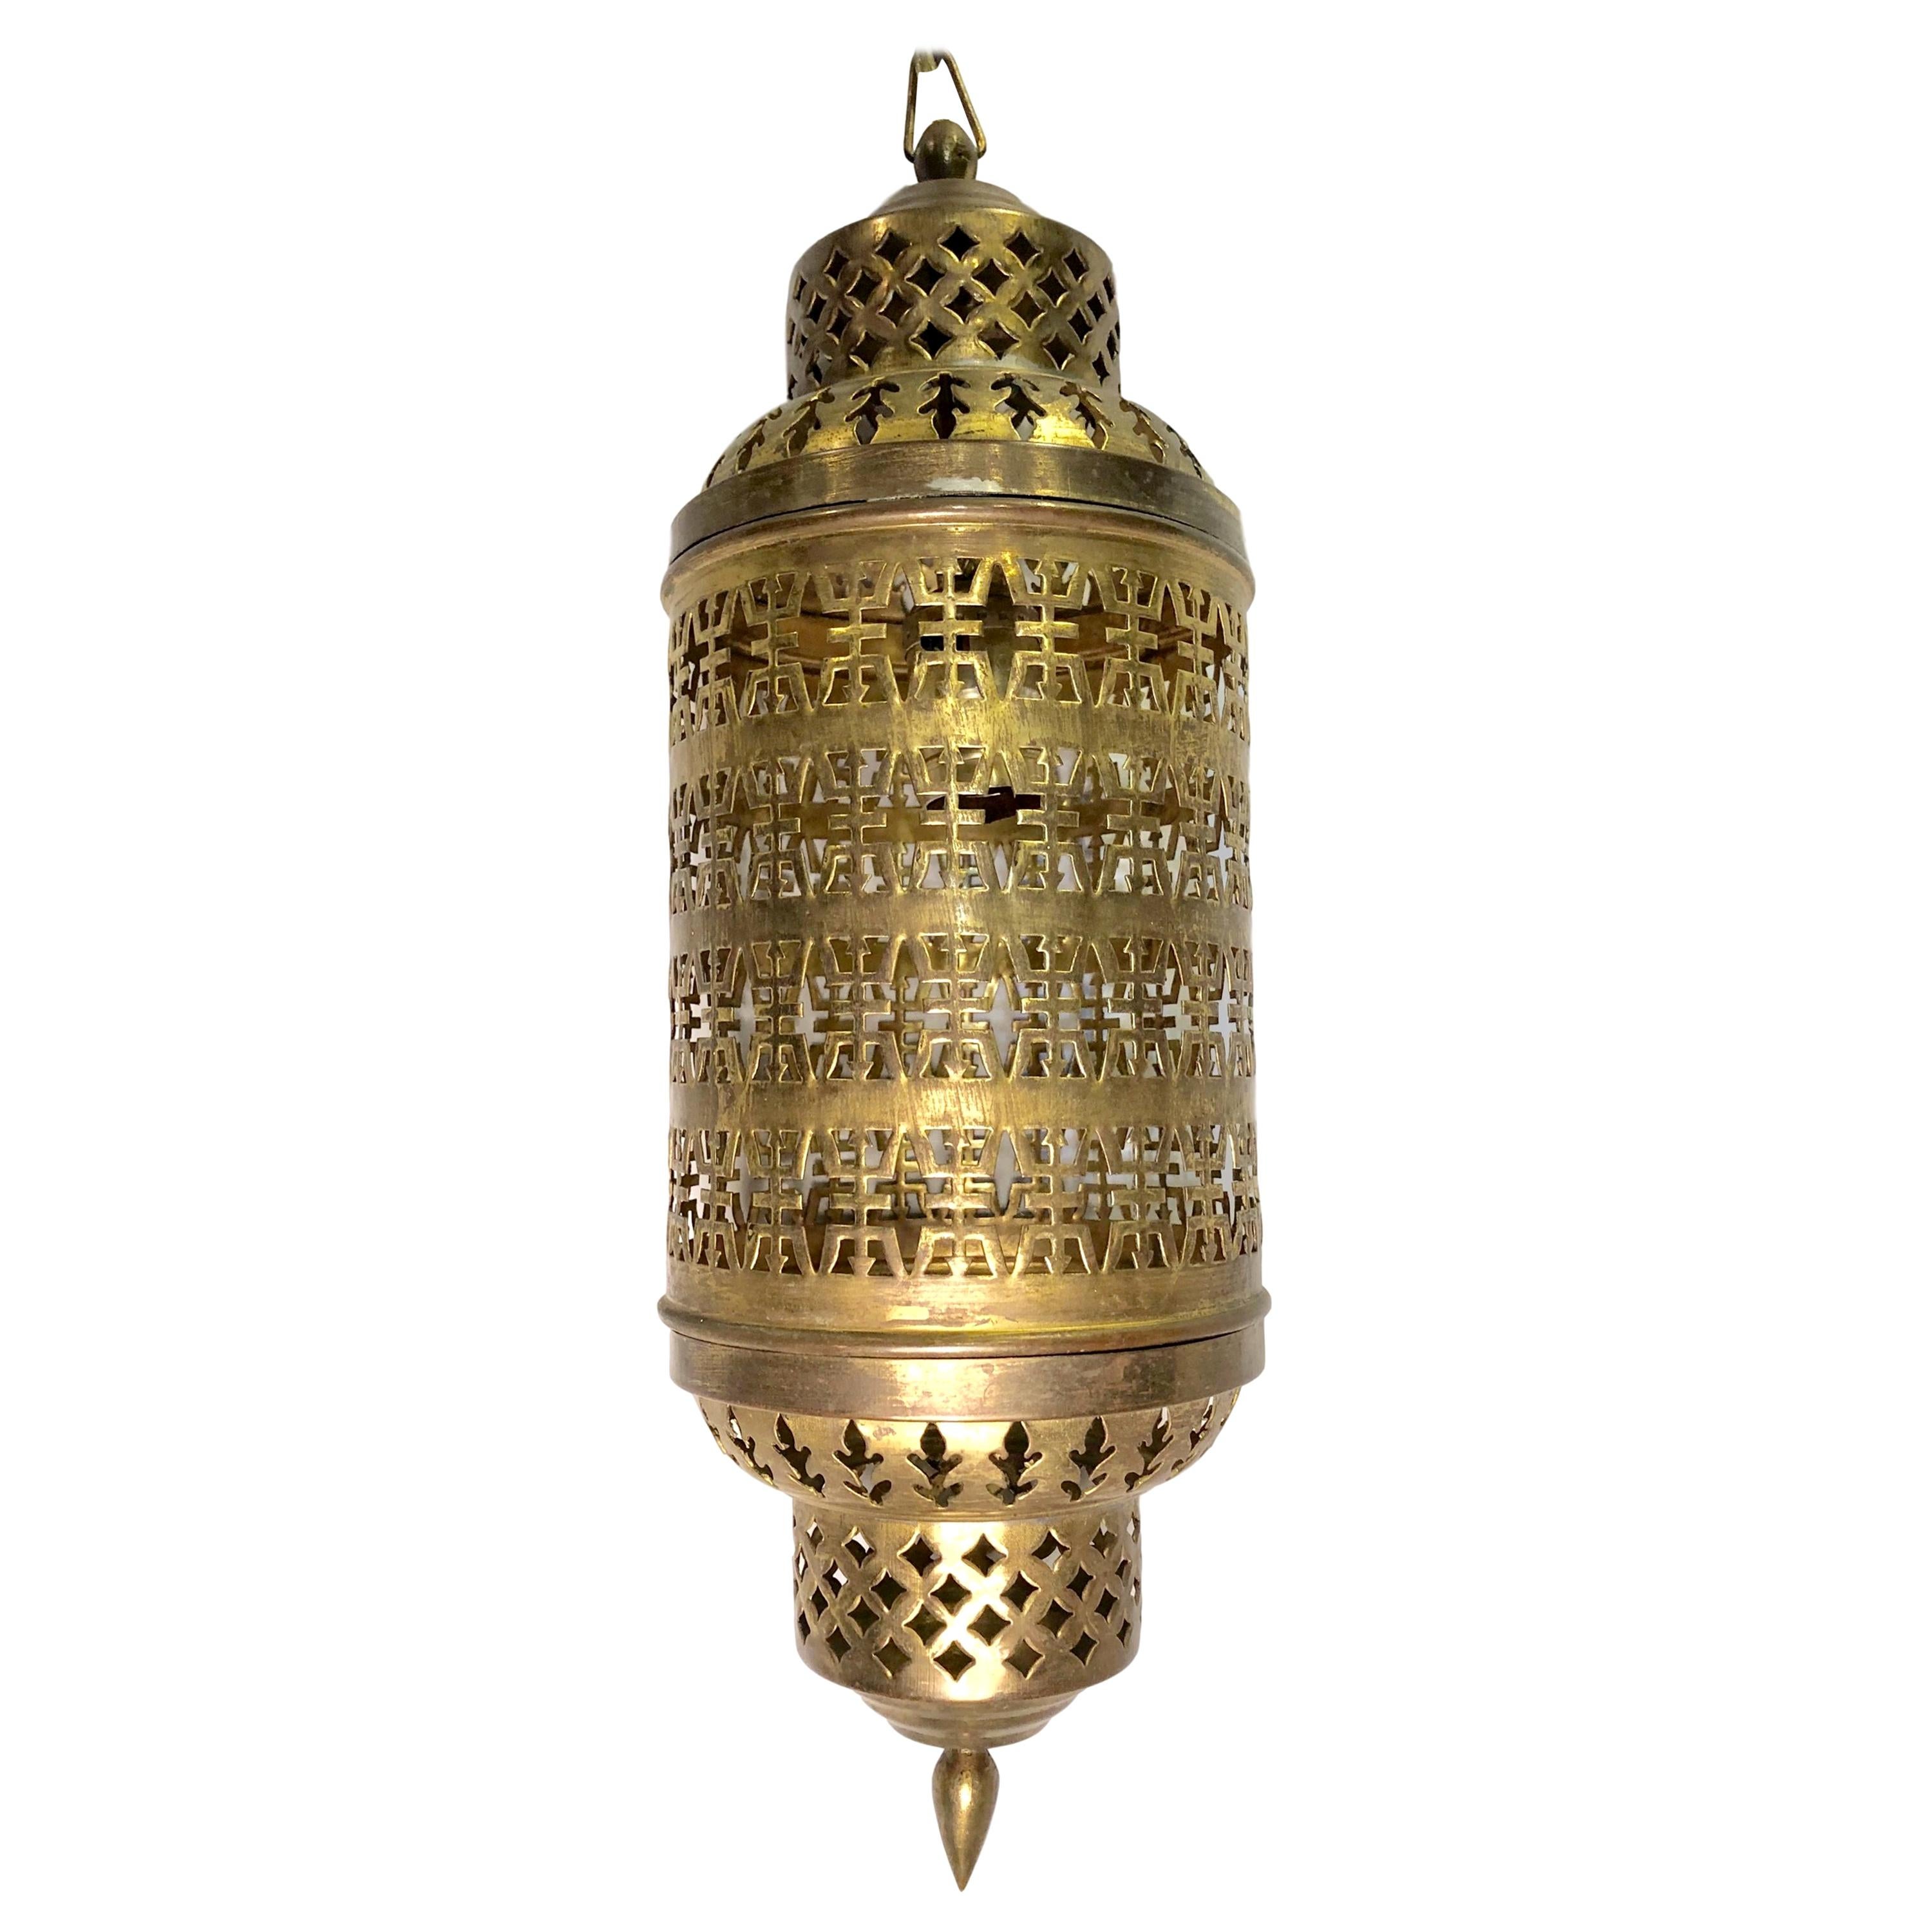 Hammered and Pierced Middle Eastern Lantern